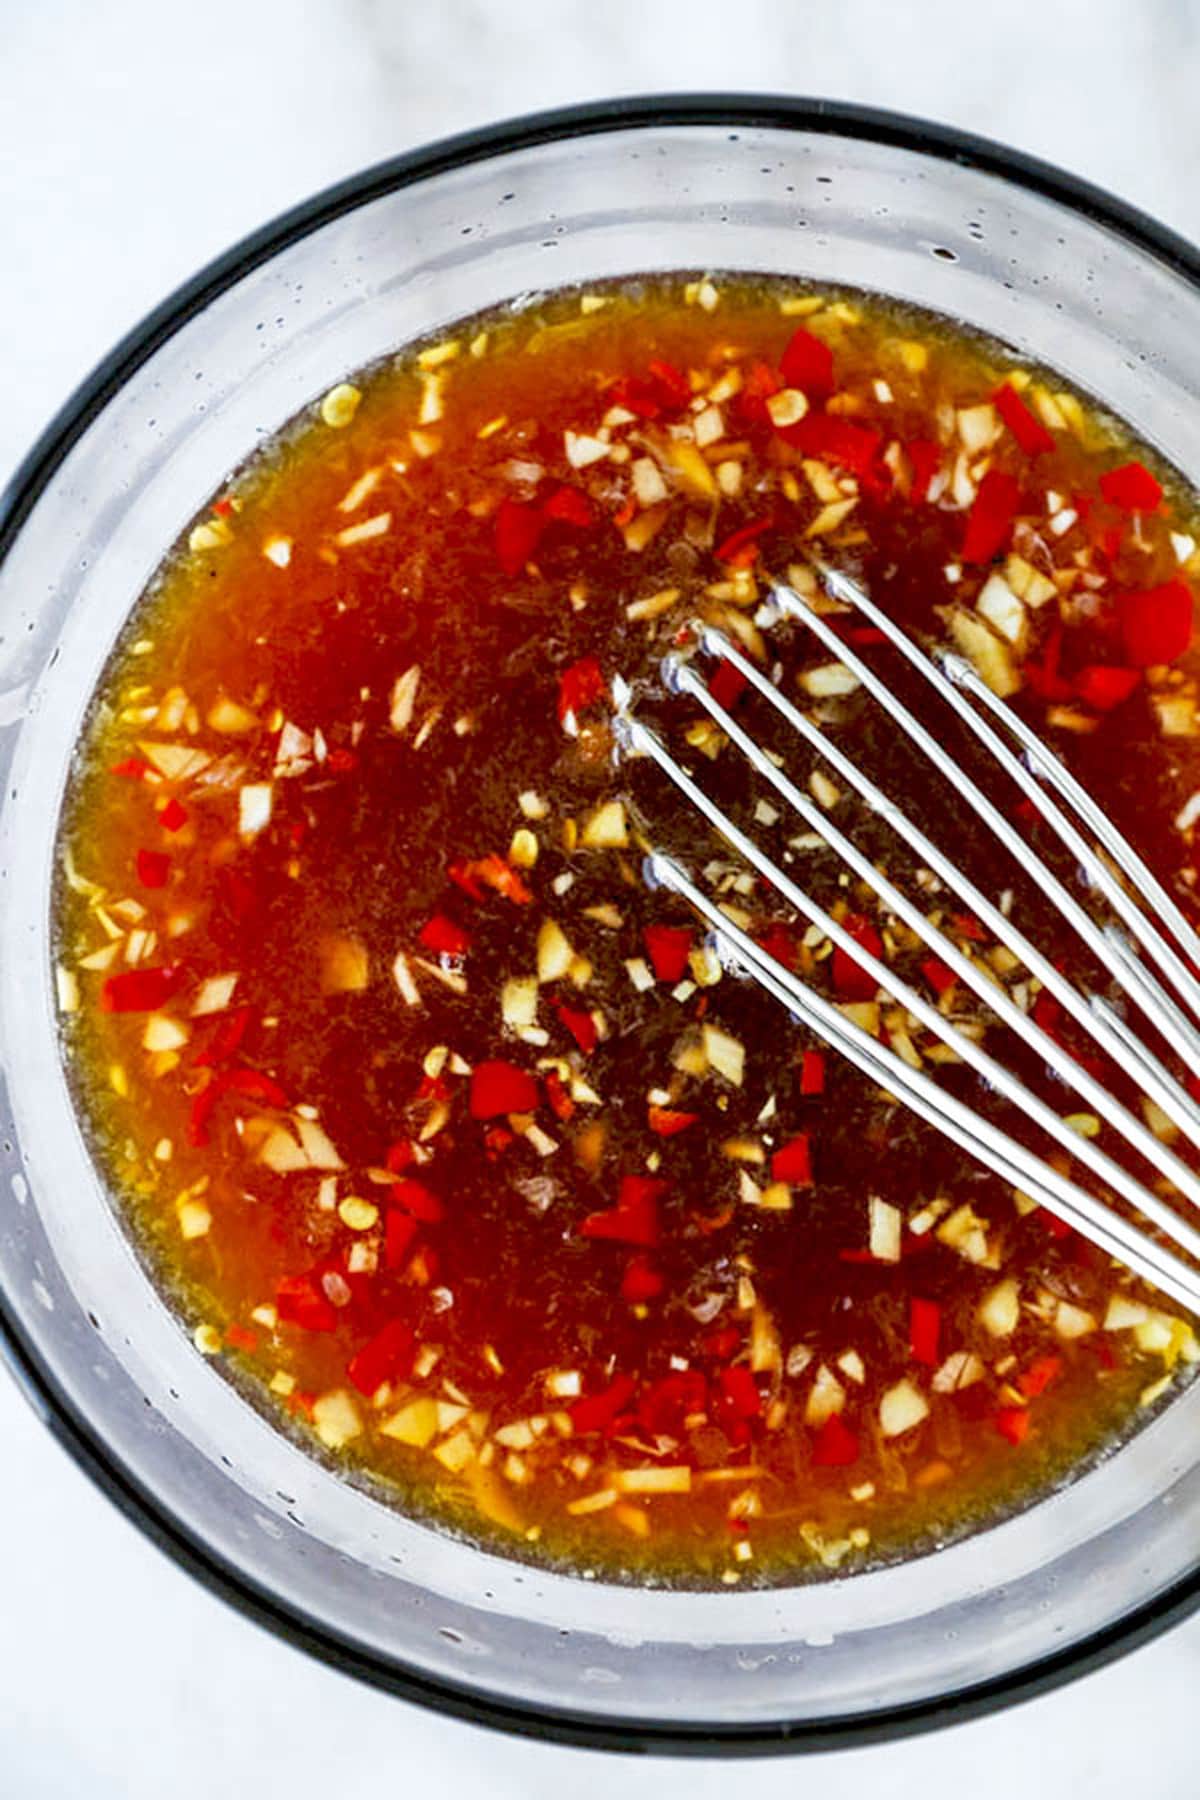 nuoc cham - Vietnamese dipping sauce